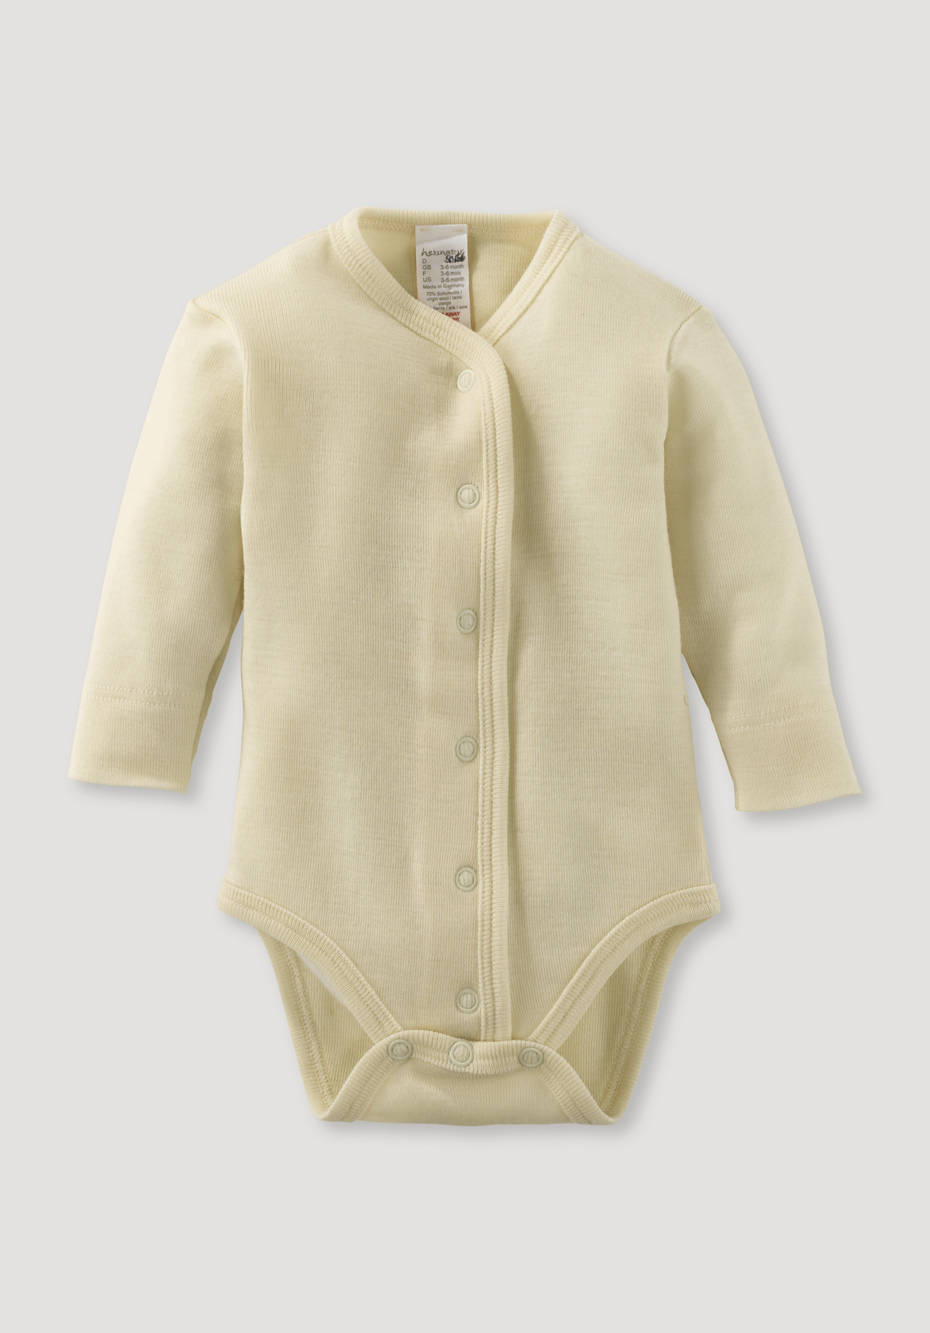 Fest Udpakning Har råd til Undyed first body made of organic merino wool and silk 51742